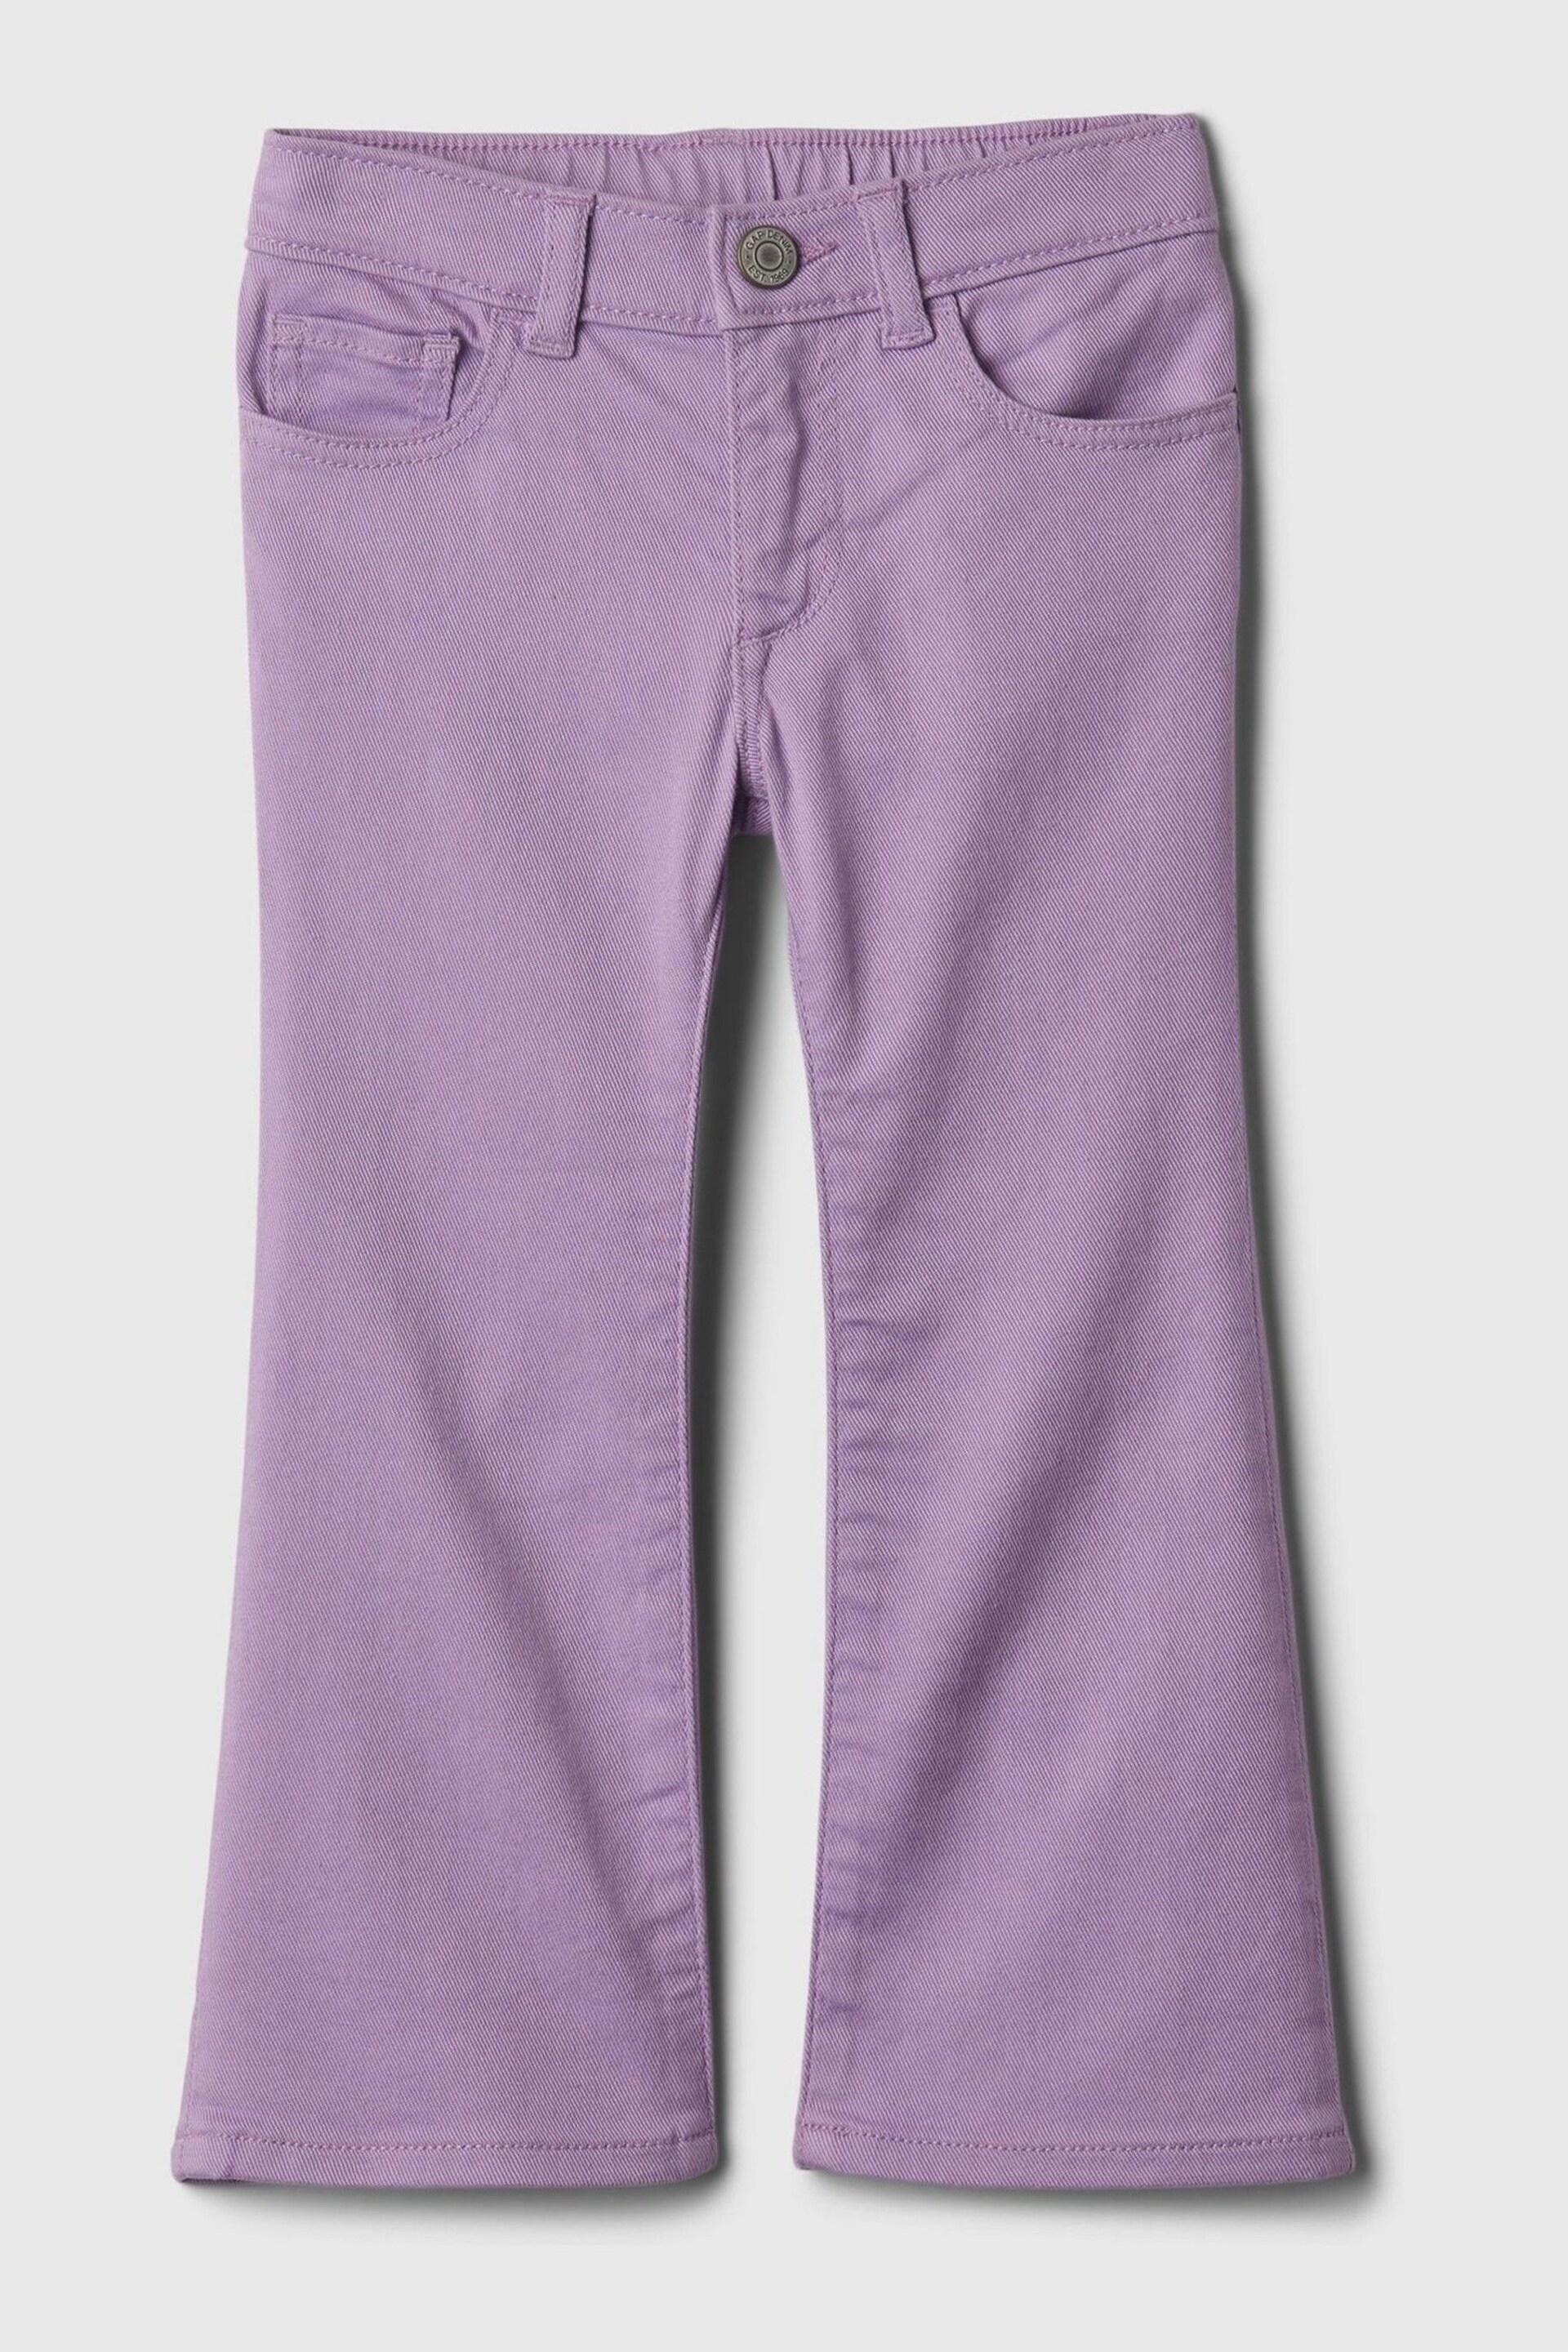 Gap Purple 70s Flare Washwell Jeans (6mths-5yrs) - Image 1 of 2